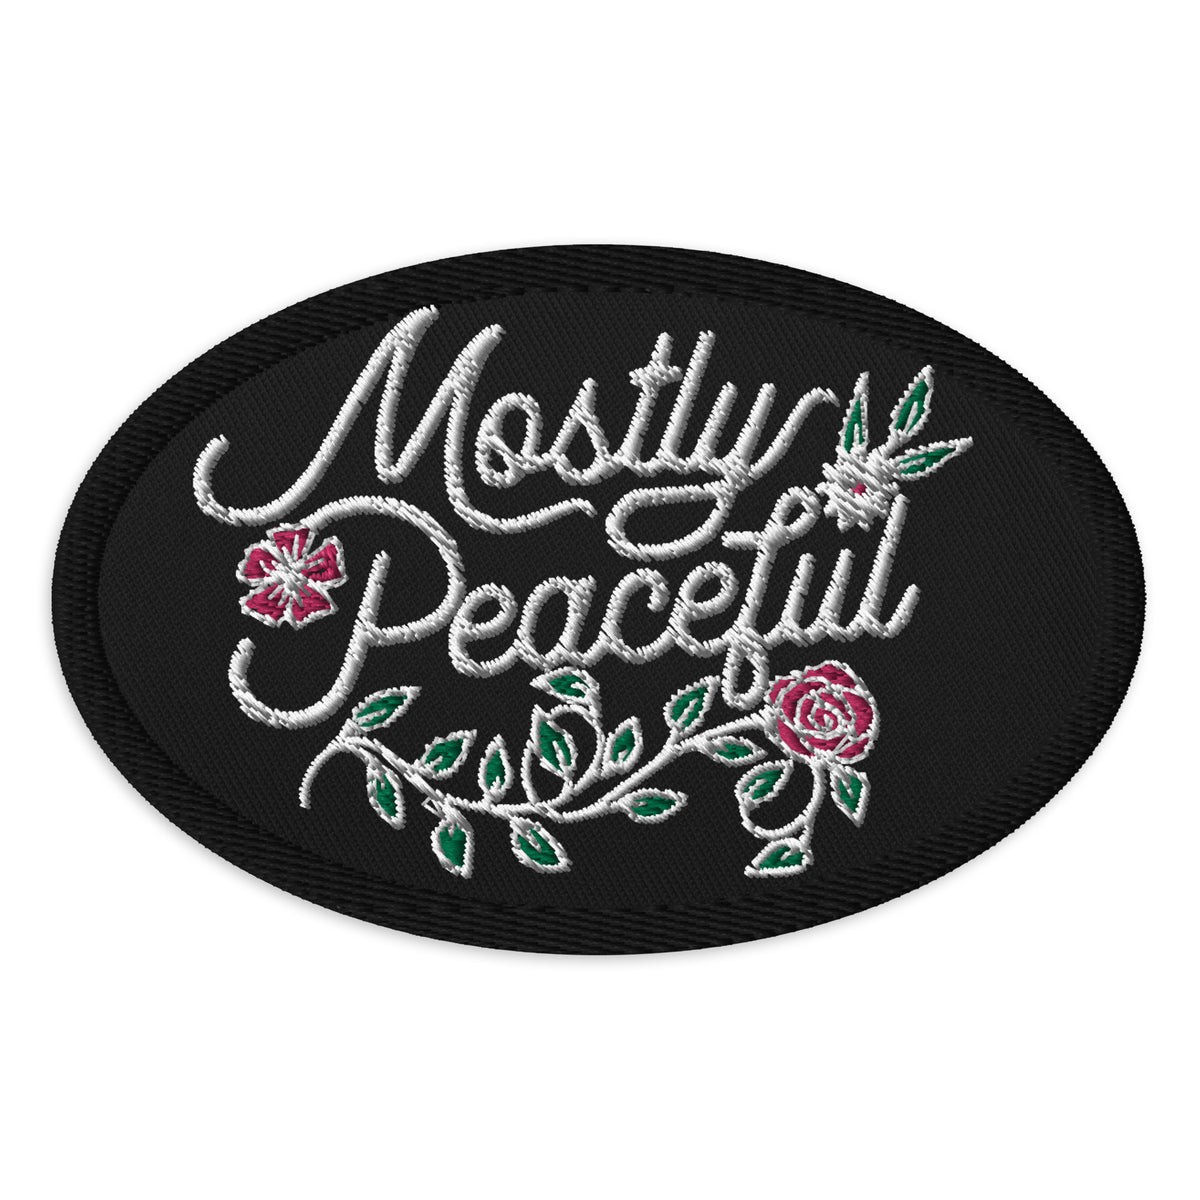 Mostly Peaceful Oval Patch